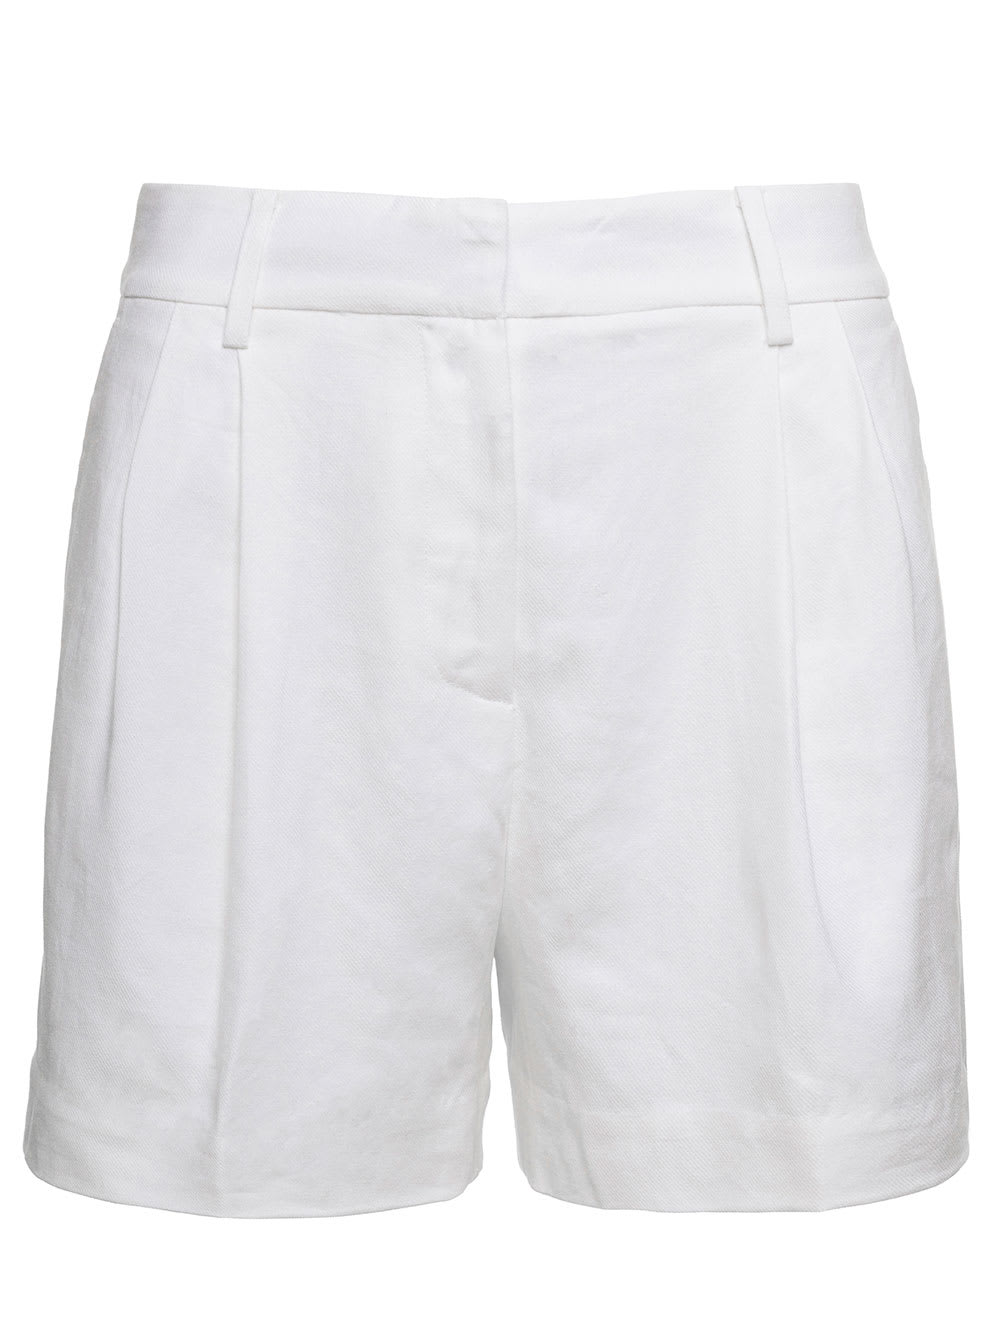 MICHAEL MICHAEL KORS WHITE BERMUDA SHORTS WITH CONCEALED FASTENING IN LINEN BLEND WOMAN